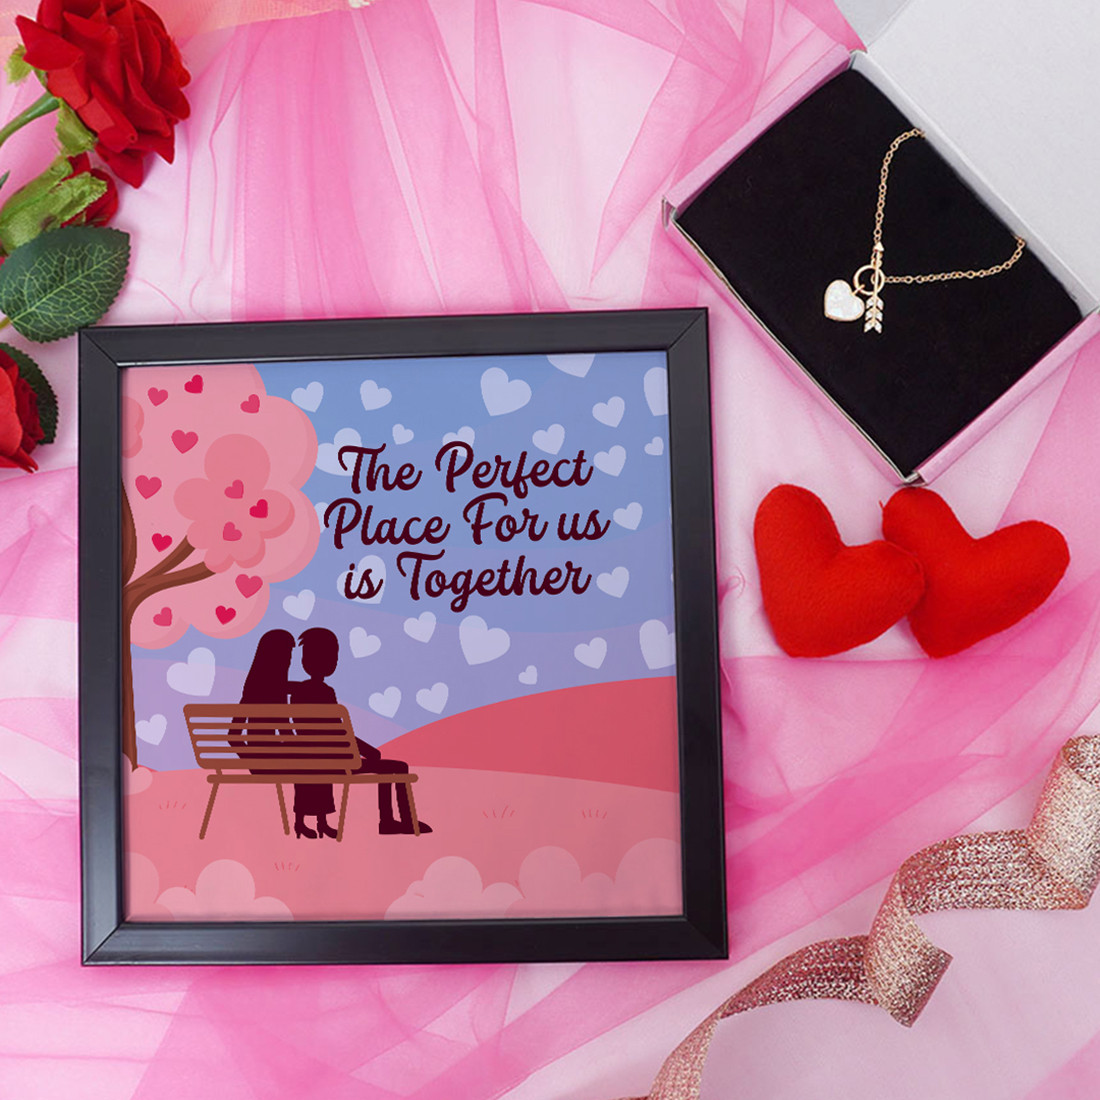 The Perfect Place for us is Together Valentine Gift Set | Valentine's Day Gifts for Girlfriend | Valentine Gift for Wife | Pendant for Girl/Women | Photo Frame (8x8 Inches)